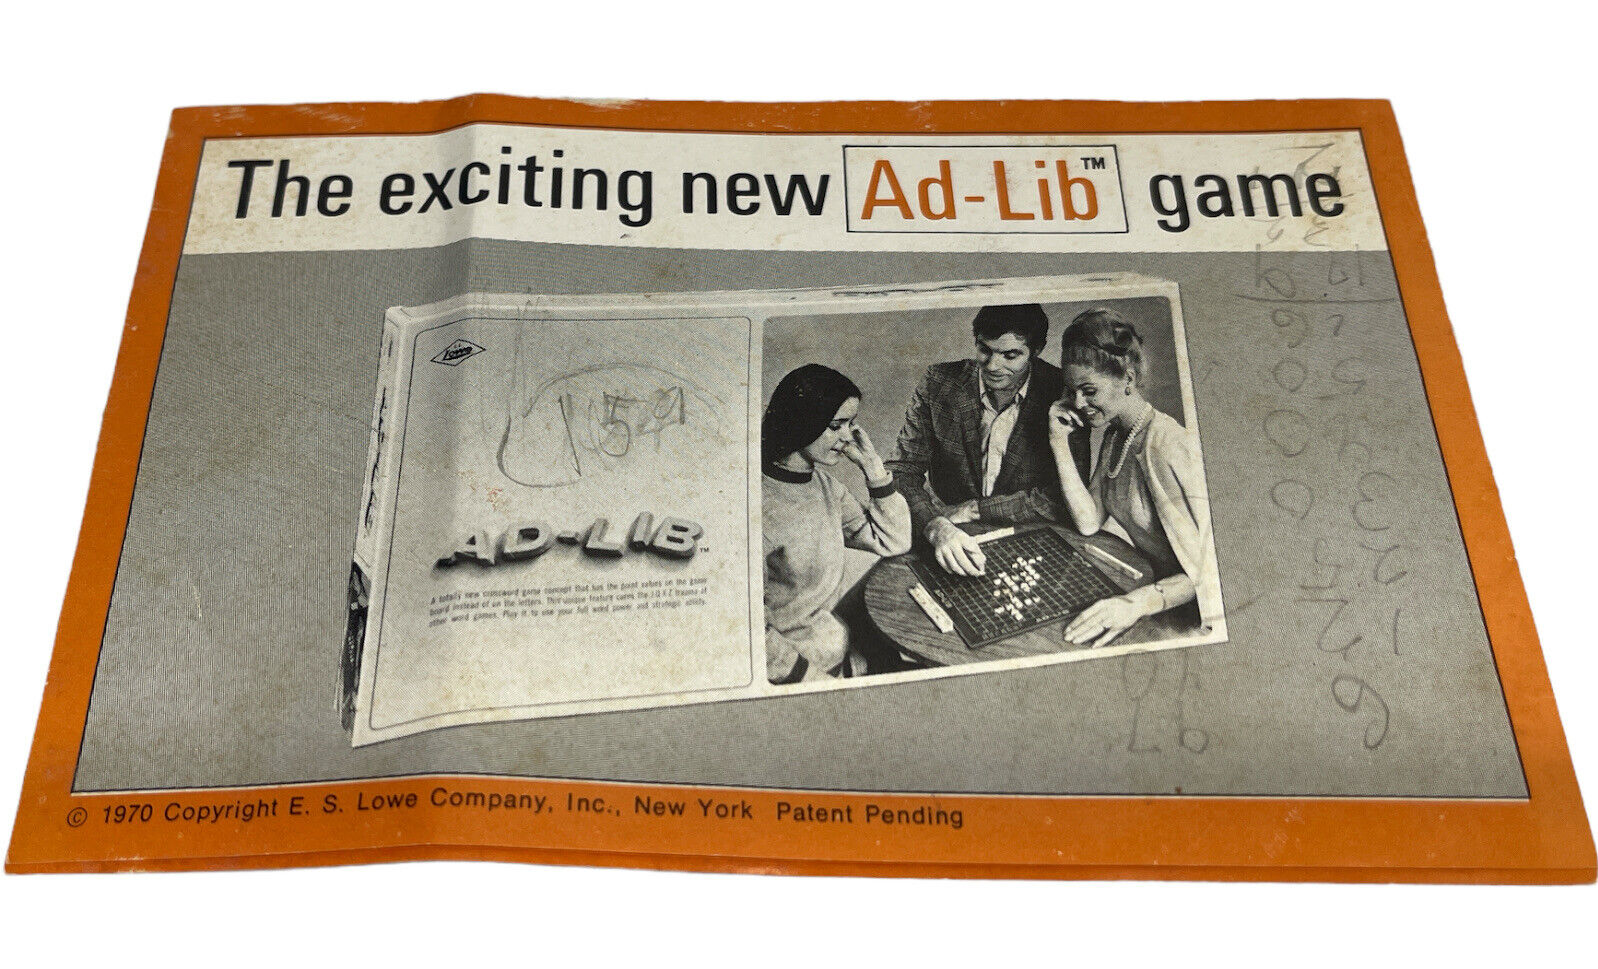 Rare Vintage Original 1970 ES Lowe NY AD-LIB Game Introduction Purchase Coupon